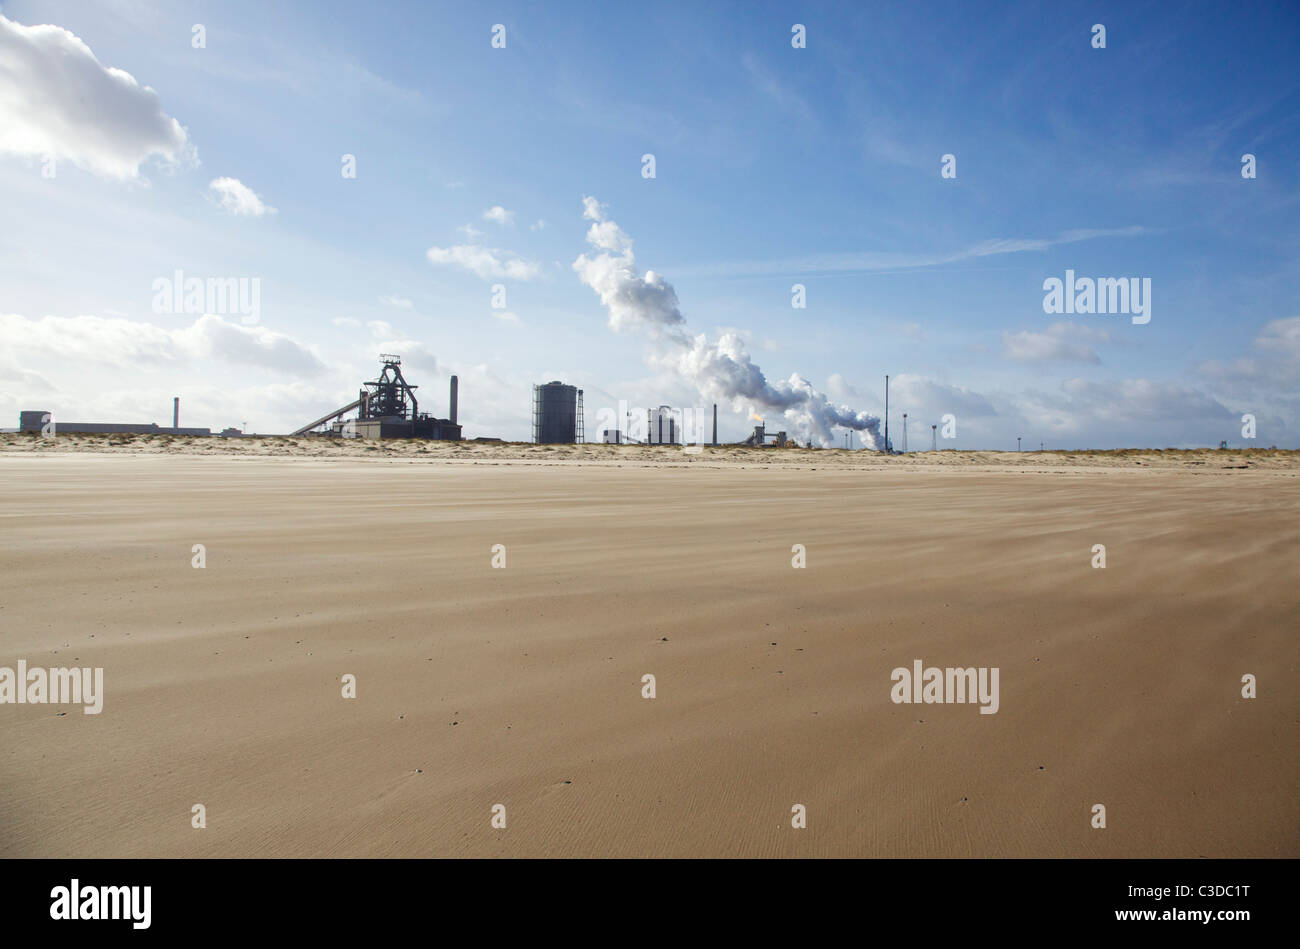 Redcar steelworks with wind blown sandy beach in foreground Stock Photo